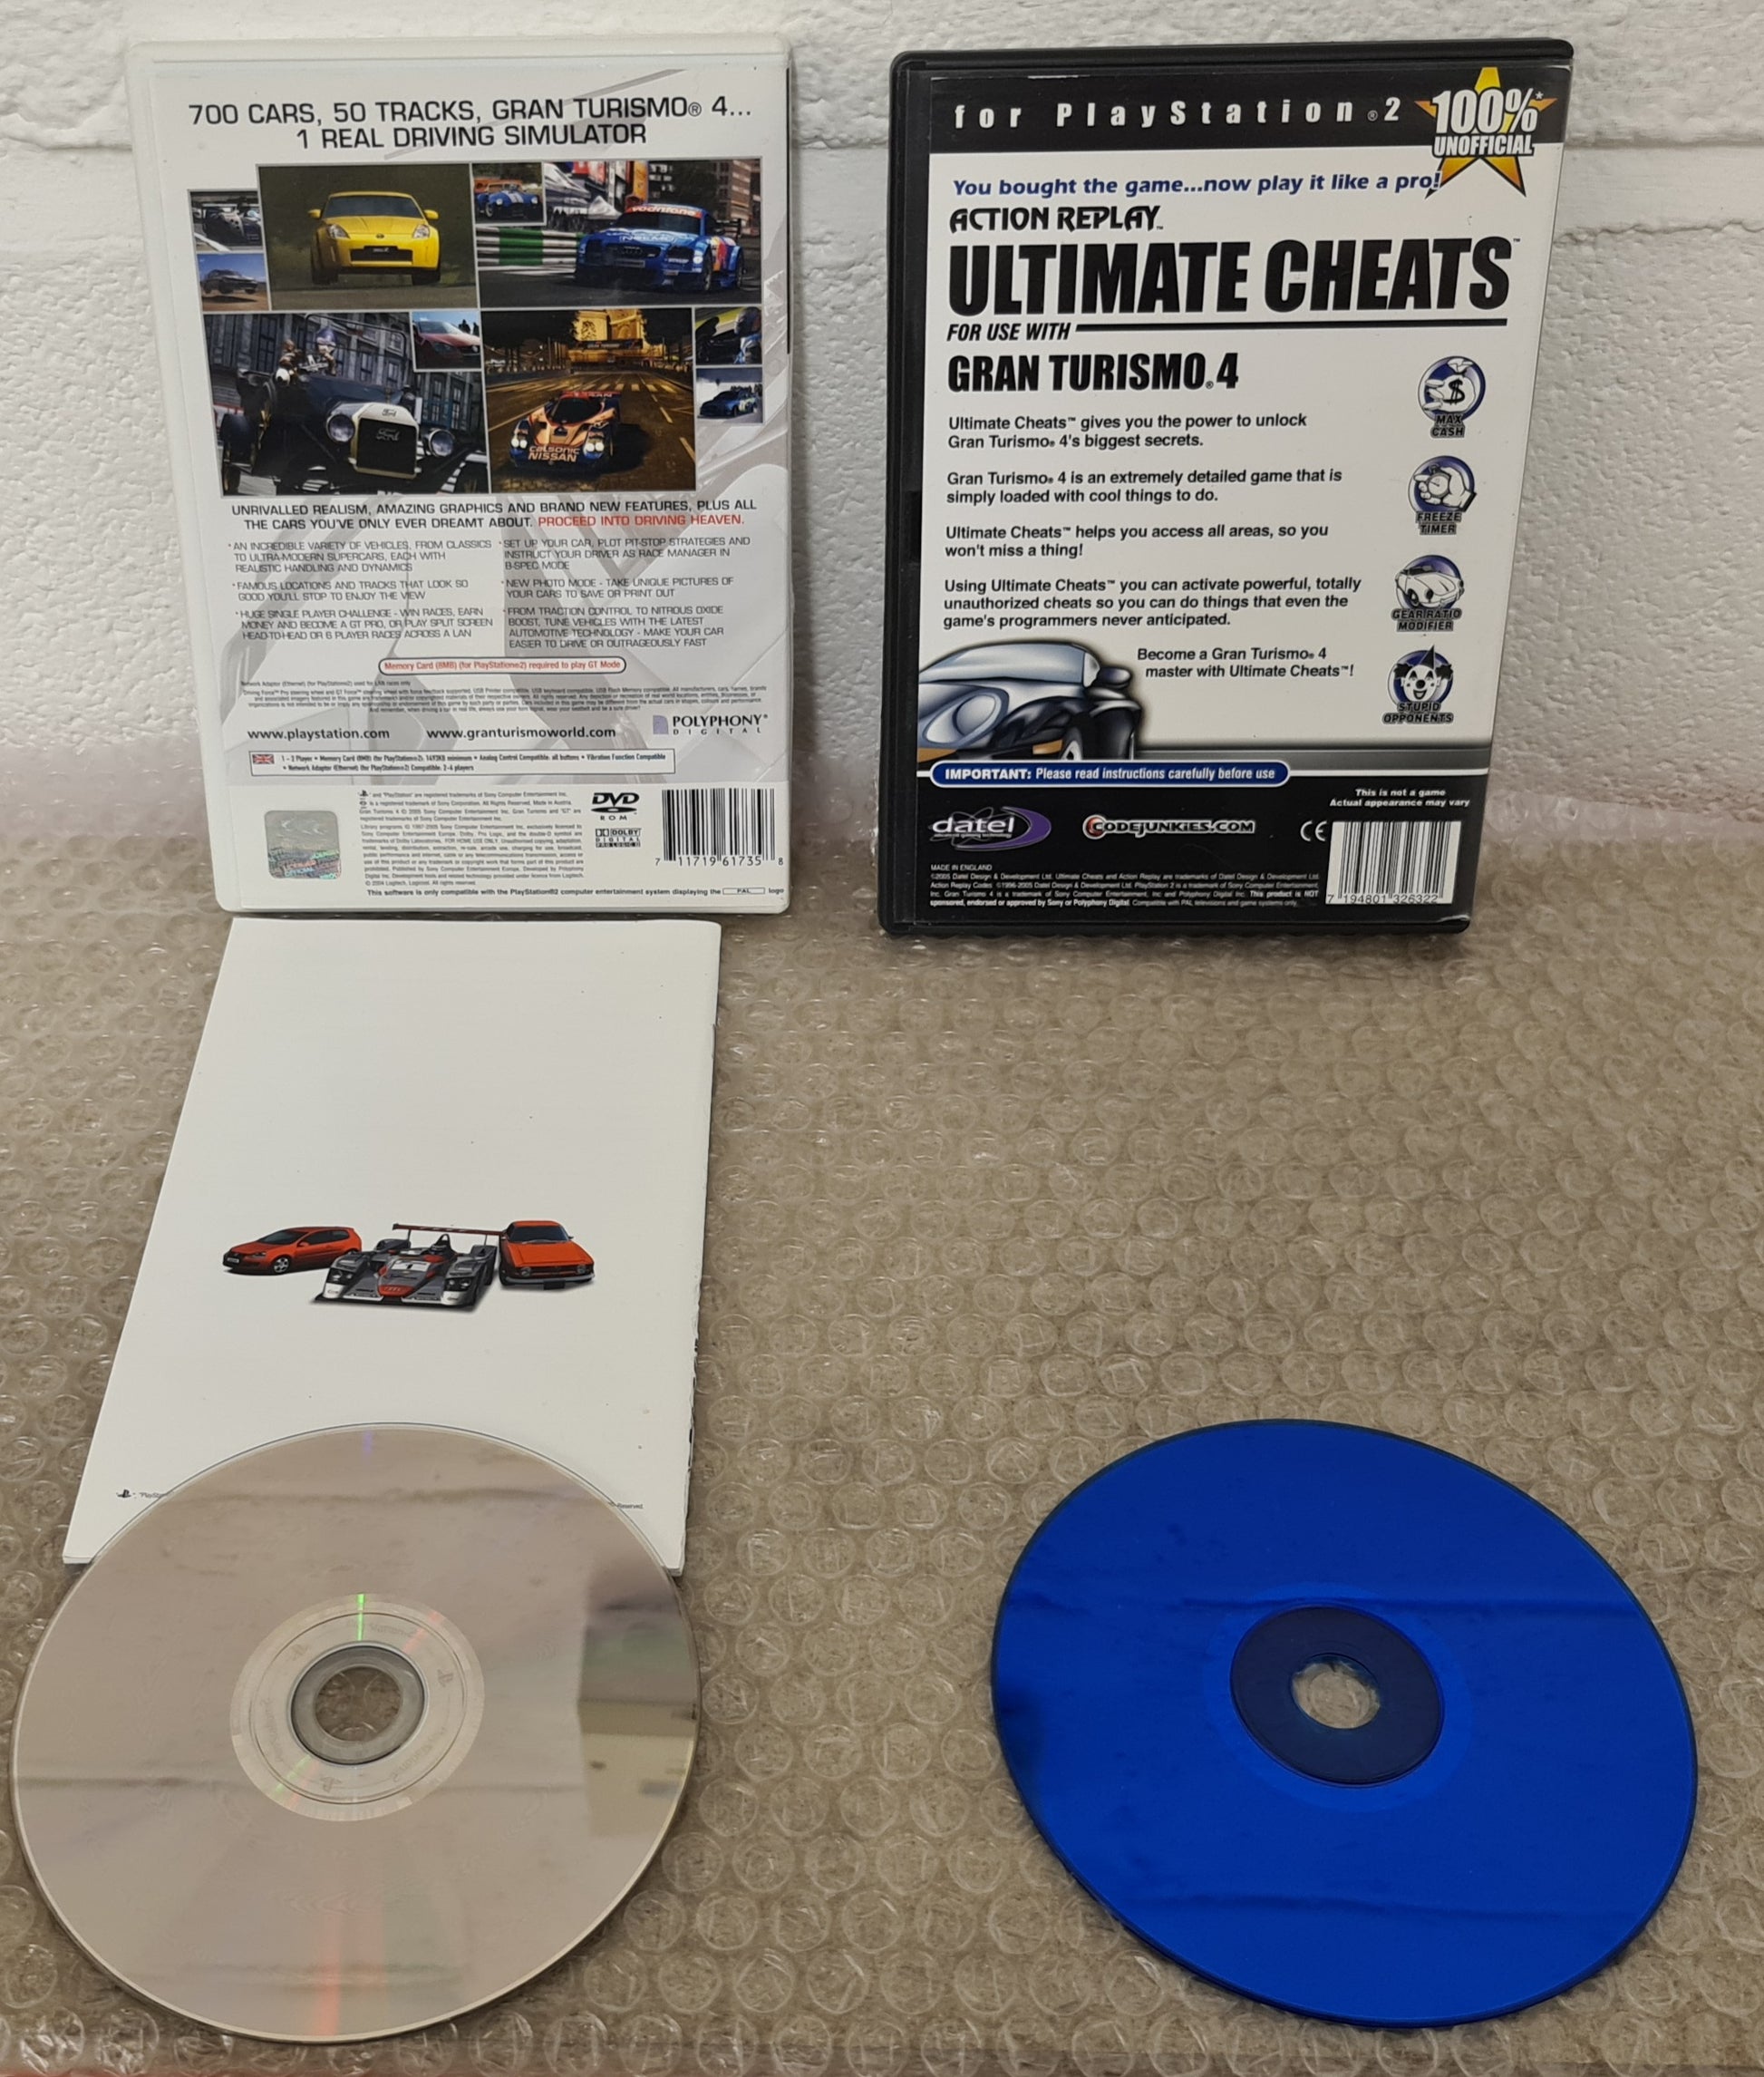 Gran Turismo 4 with Action Replay Ultimate Cheats Sony Playstation 2 ( –  Retro Gamer Heaven